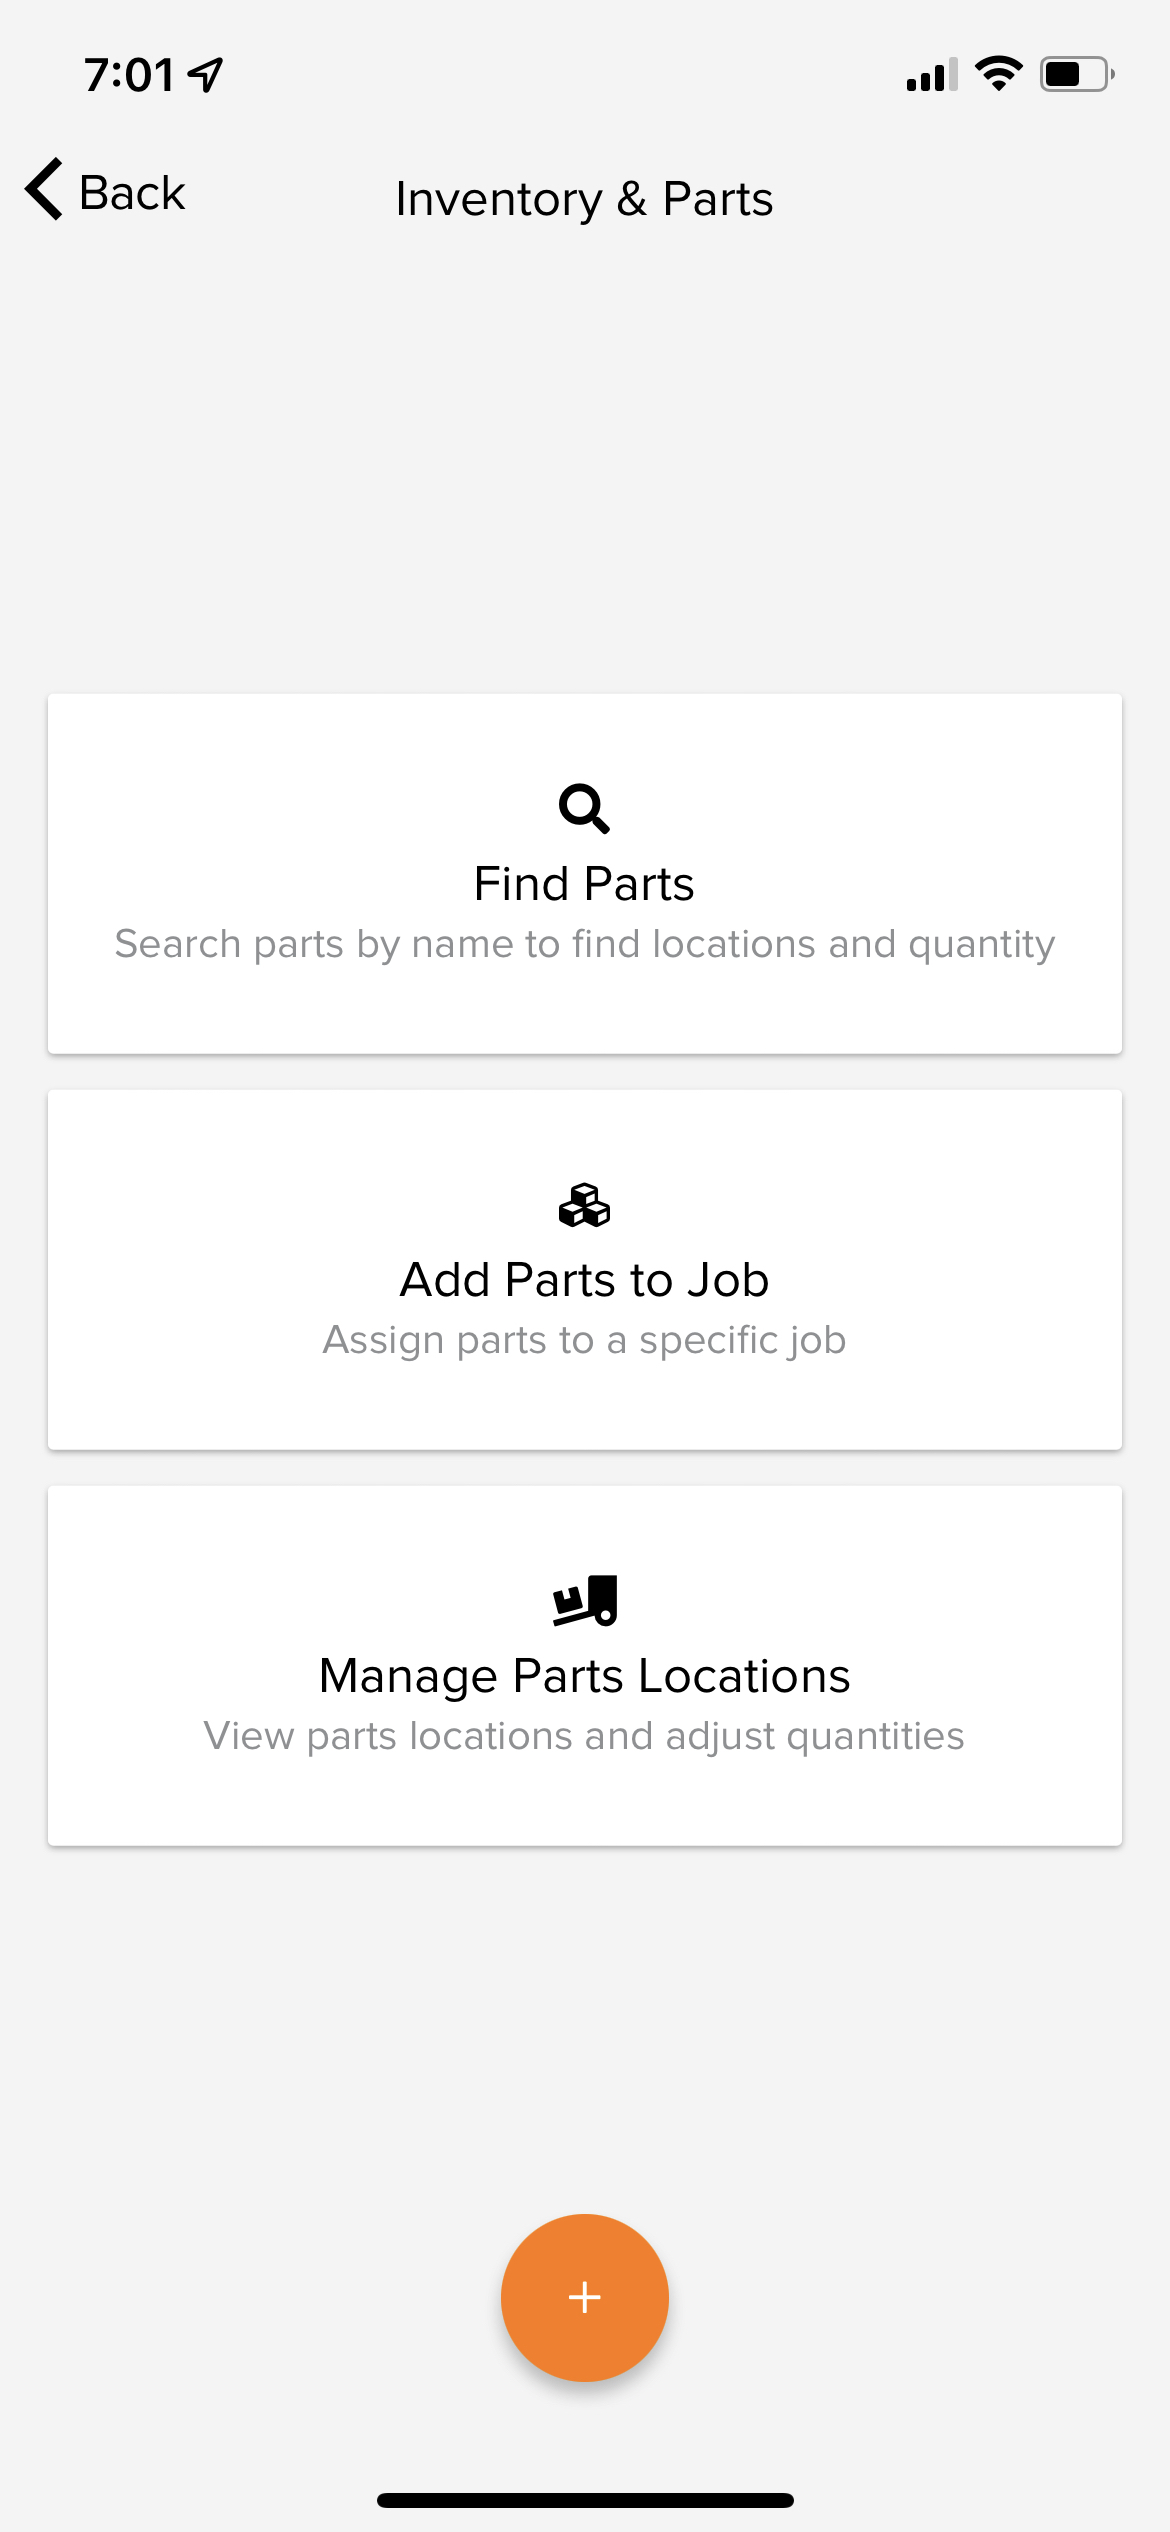 Knowify | Smartphone app | Screenshot from the phone displaying the actions available for parts inventory